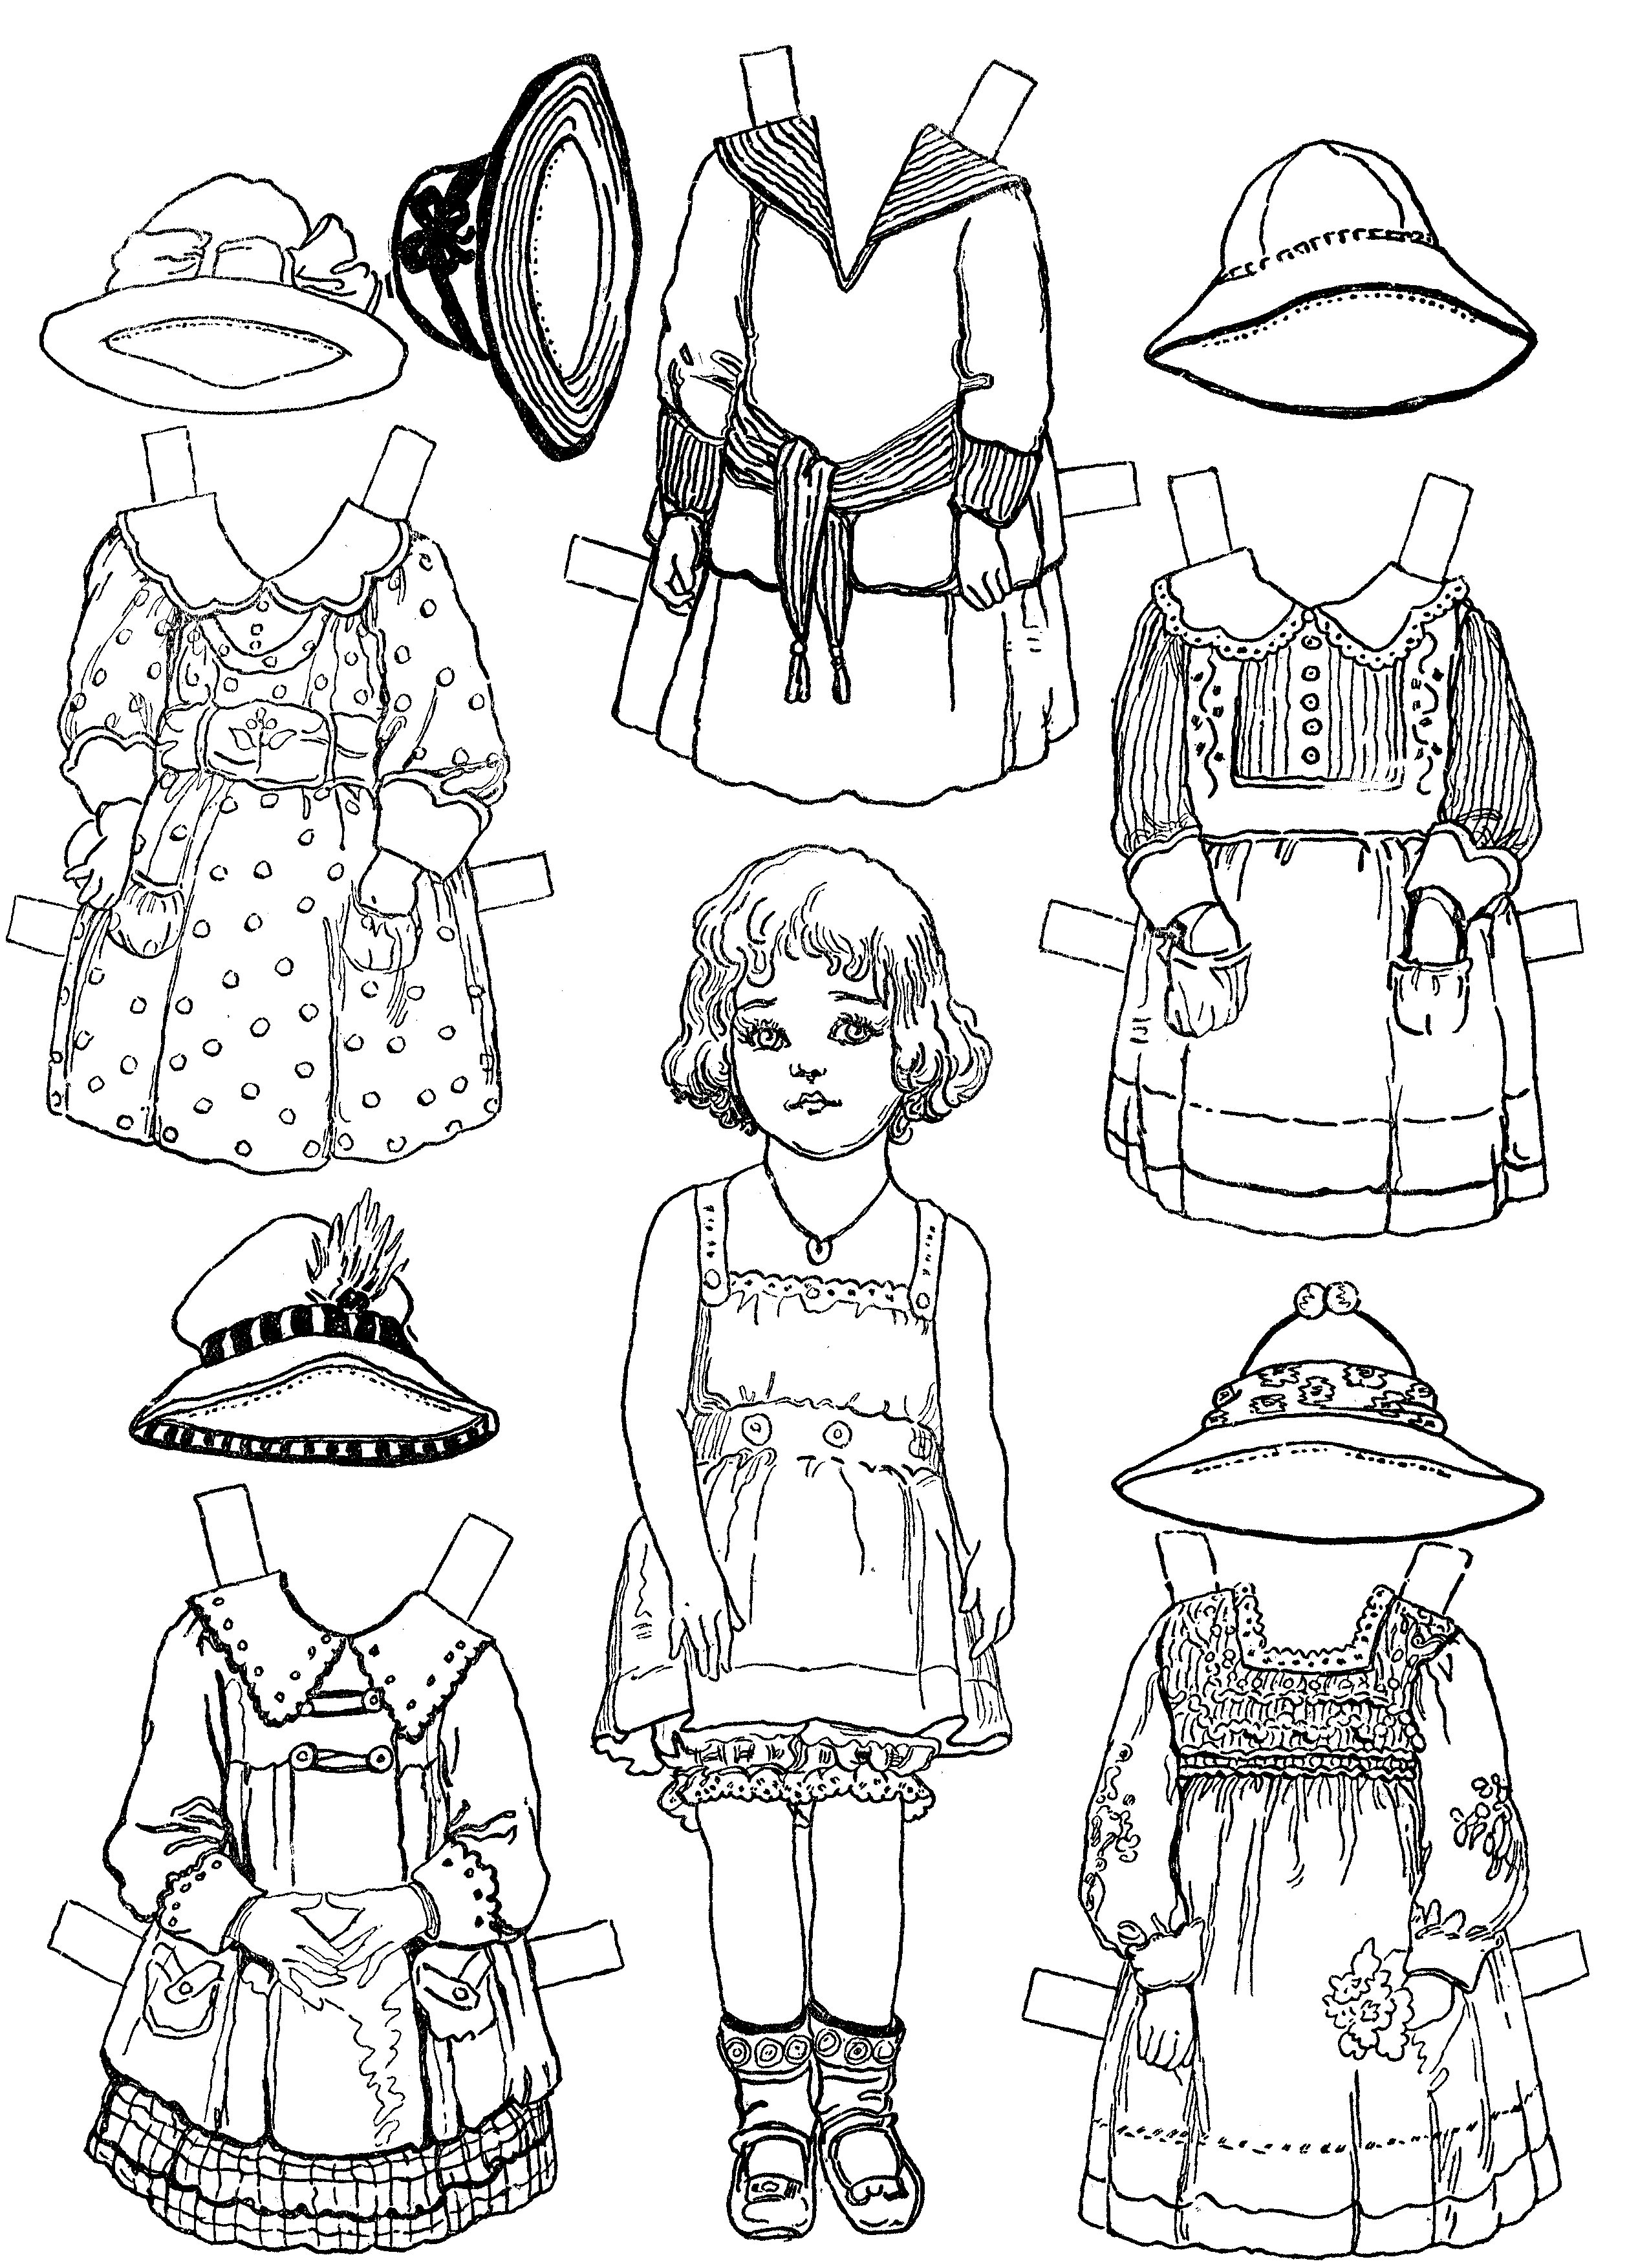 free-printable-paper-doll-coloring-pages-for-kids